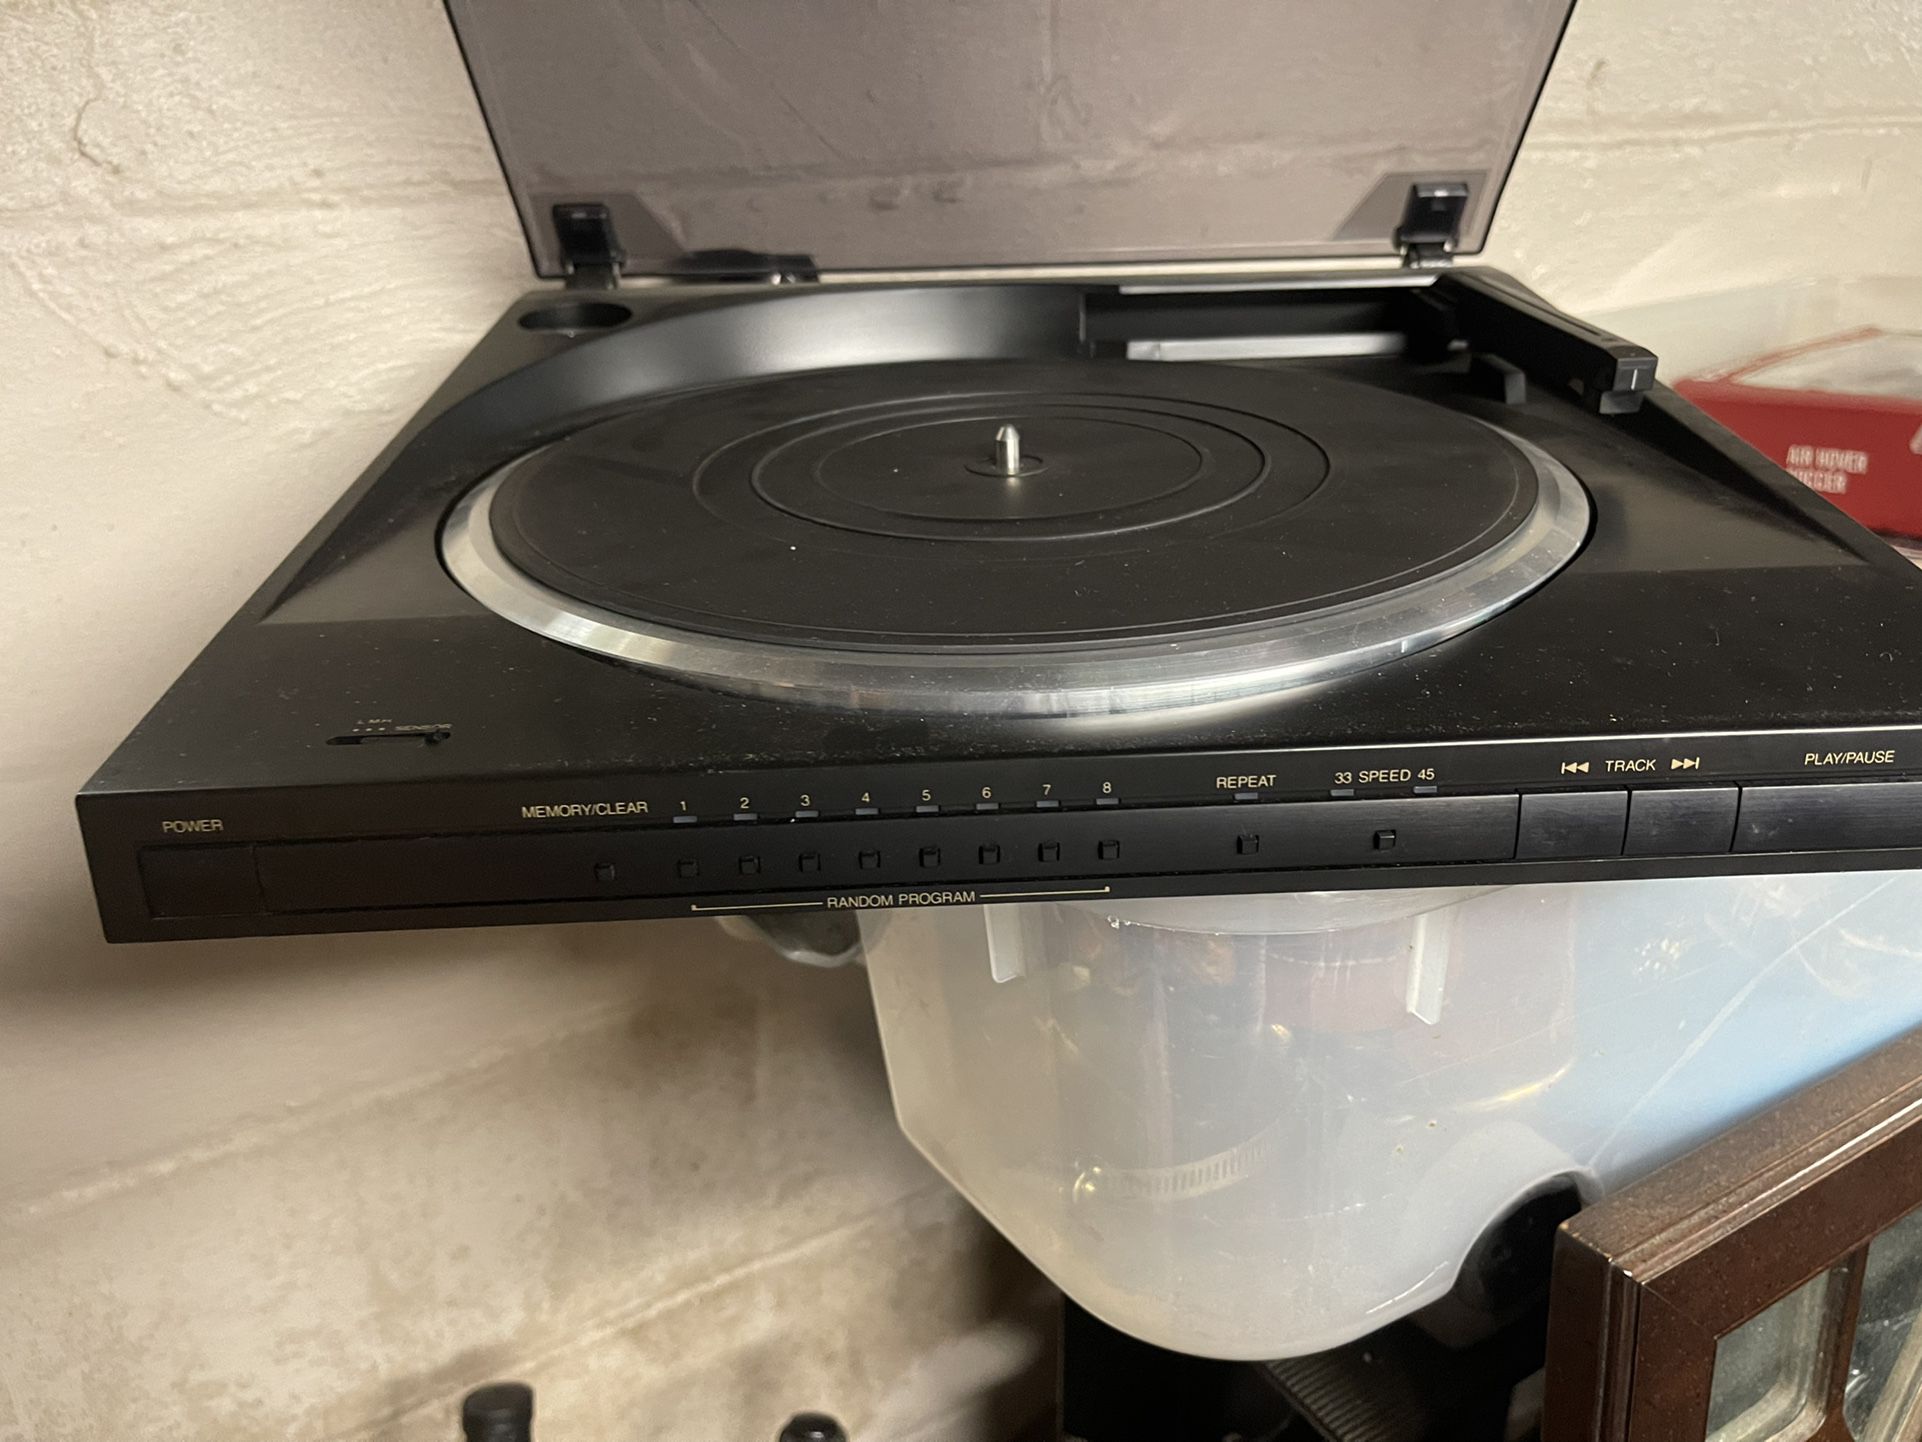 Arqspin 24 Motorized Photography Turntable for Sale in Fullerton, CA -  OfferUp